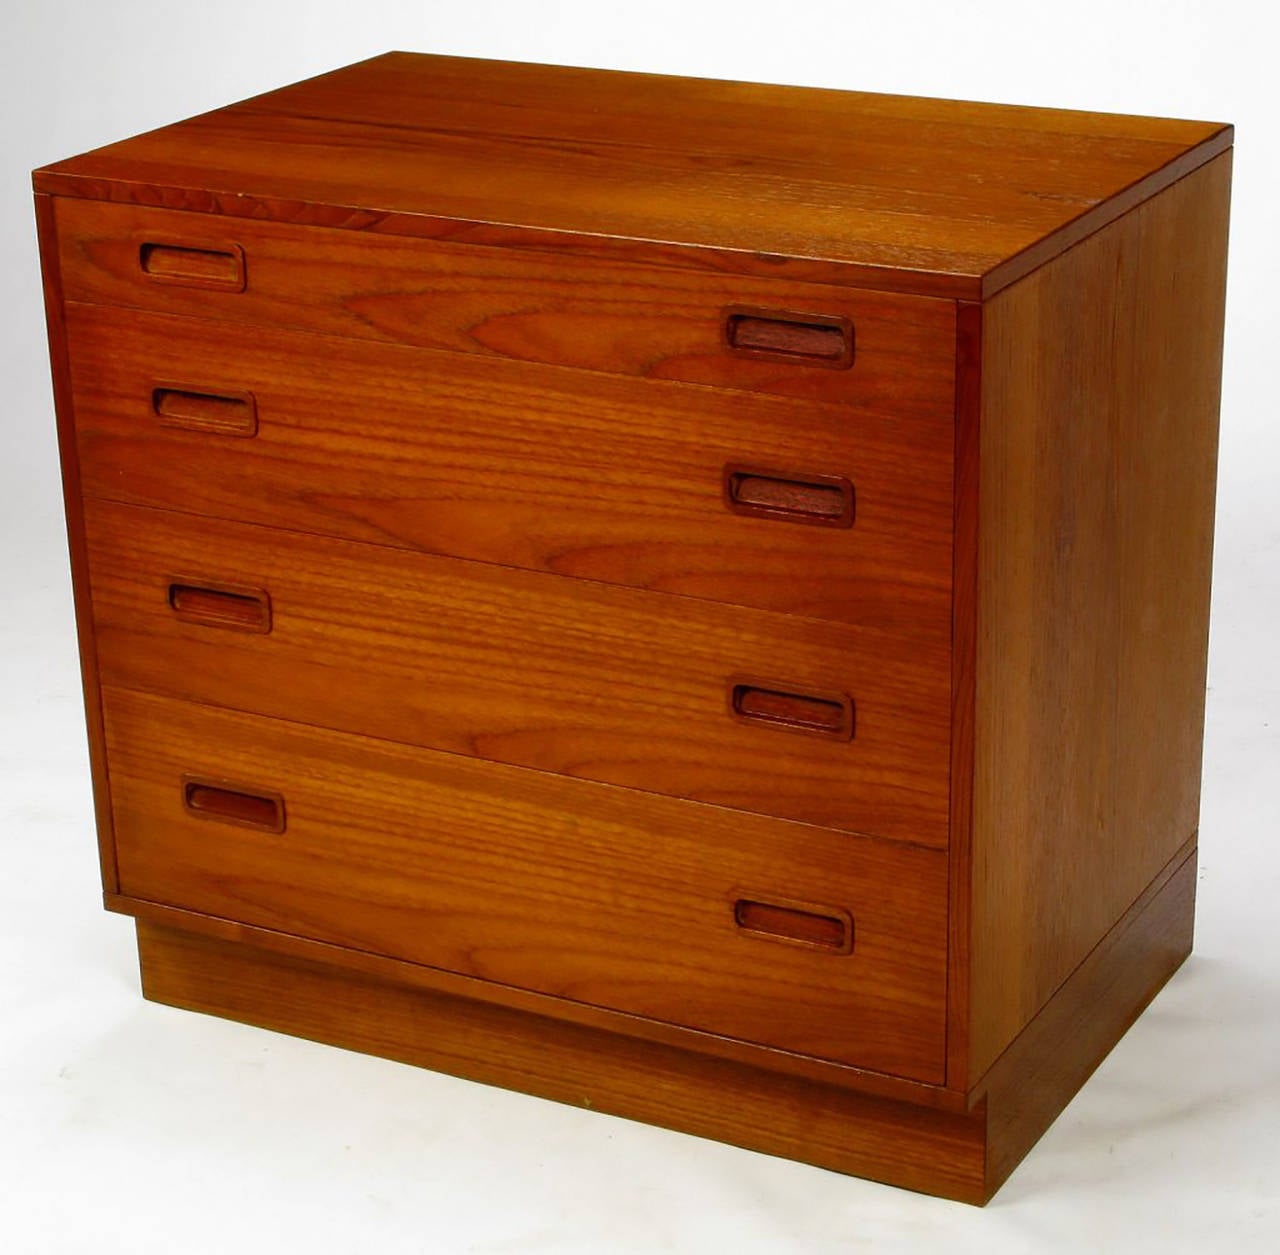 Simple and clean lined, these teakwood commodes or small chests by Danish designer Poul Hundevad could work as large bedside tables or placed side by side and used as a long and low dresser. The inset pulls are made of carved rosewood and the backs